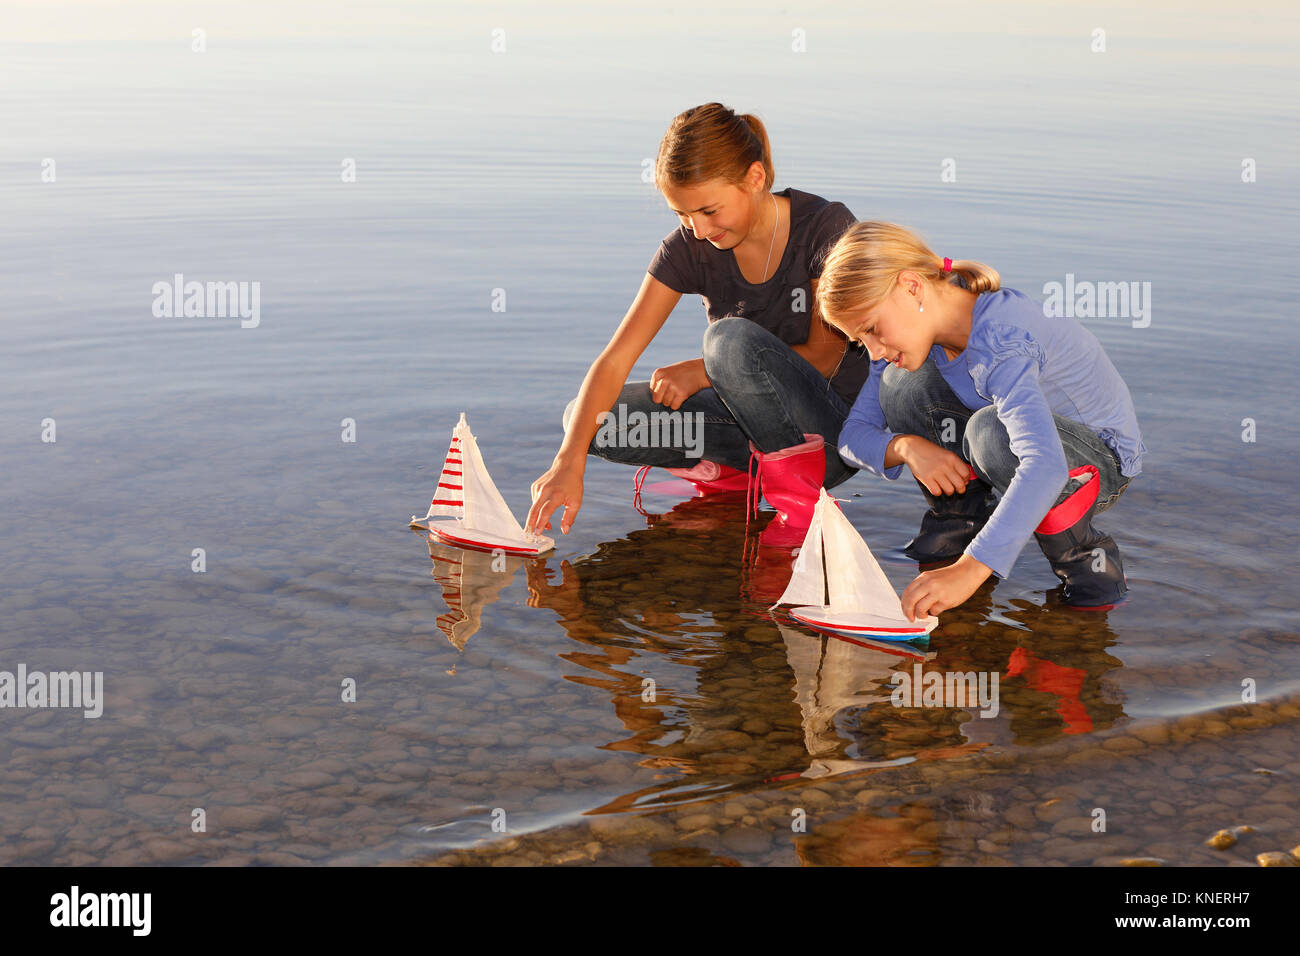 Two young girls floating toy boats on water Stock Photo